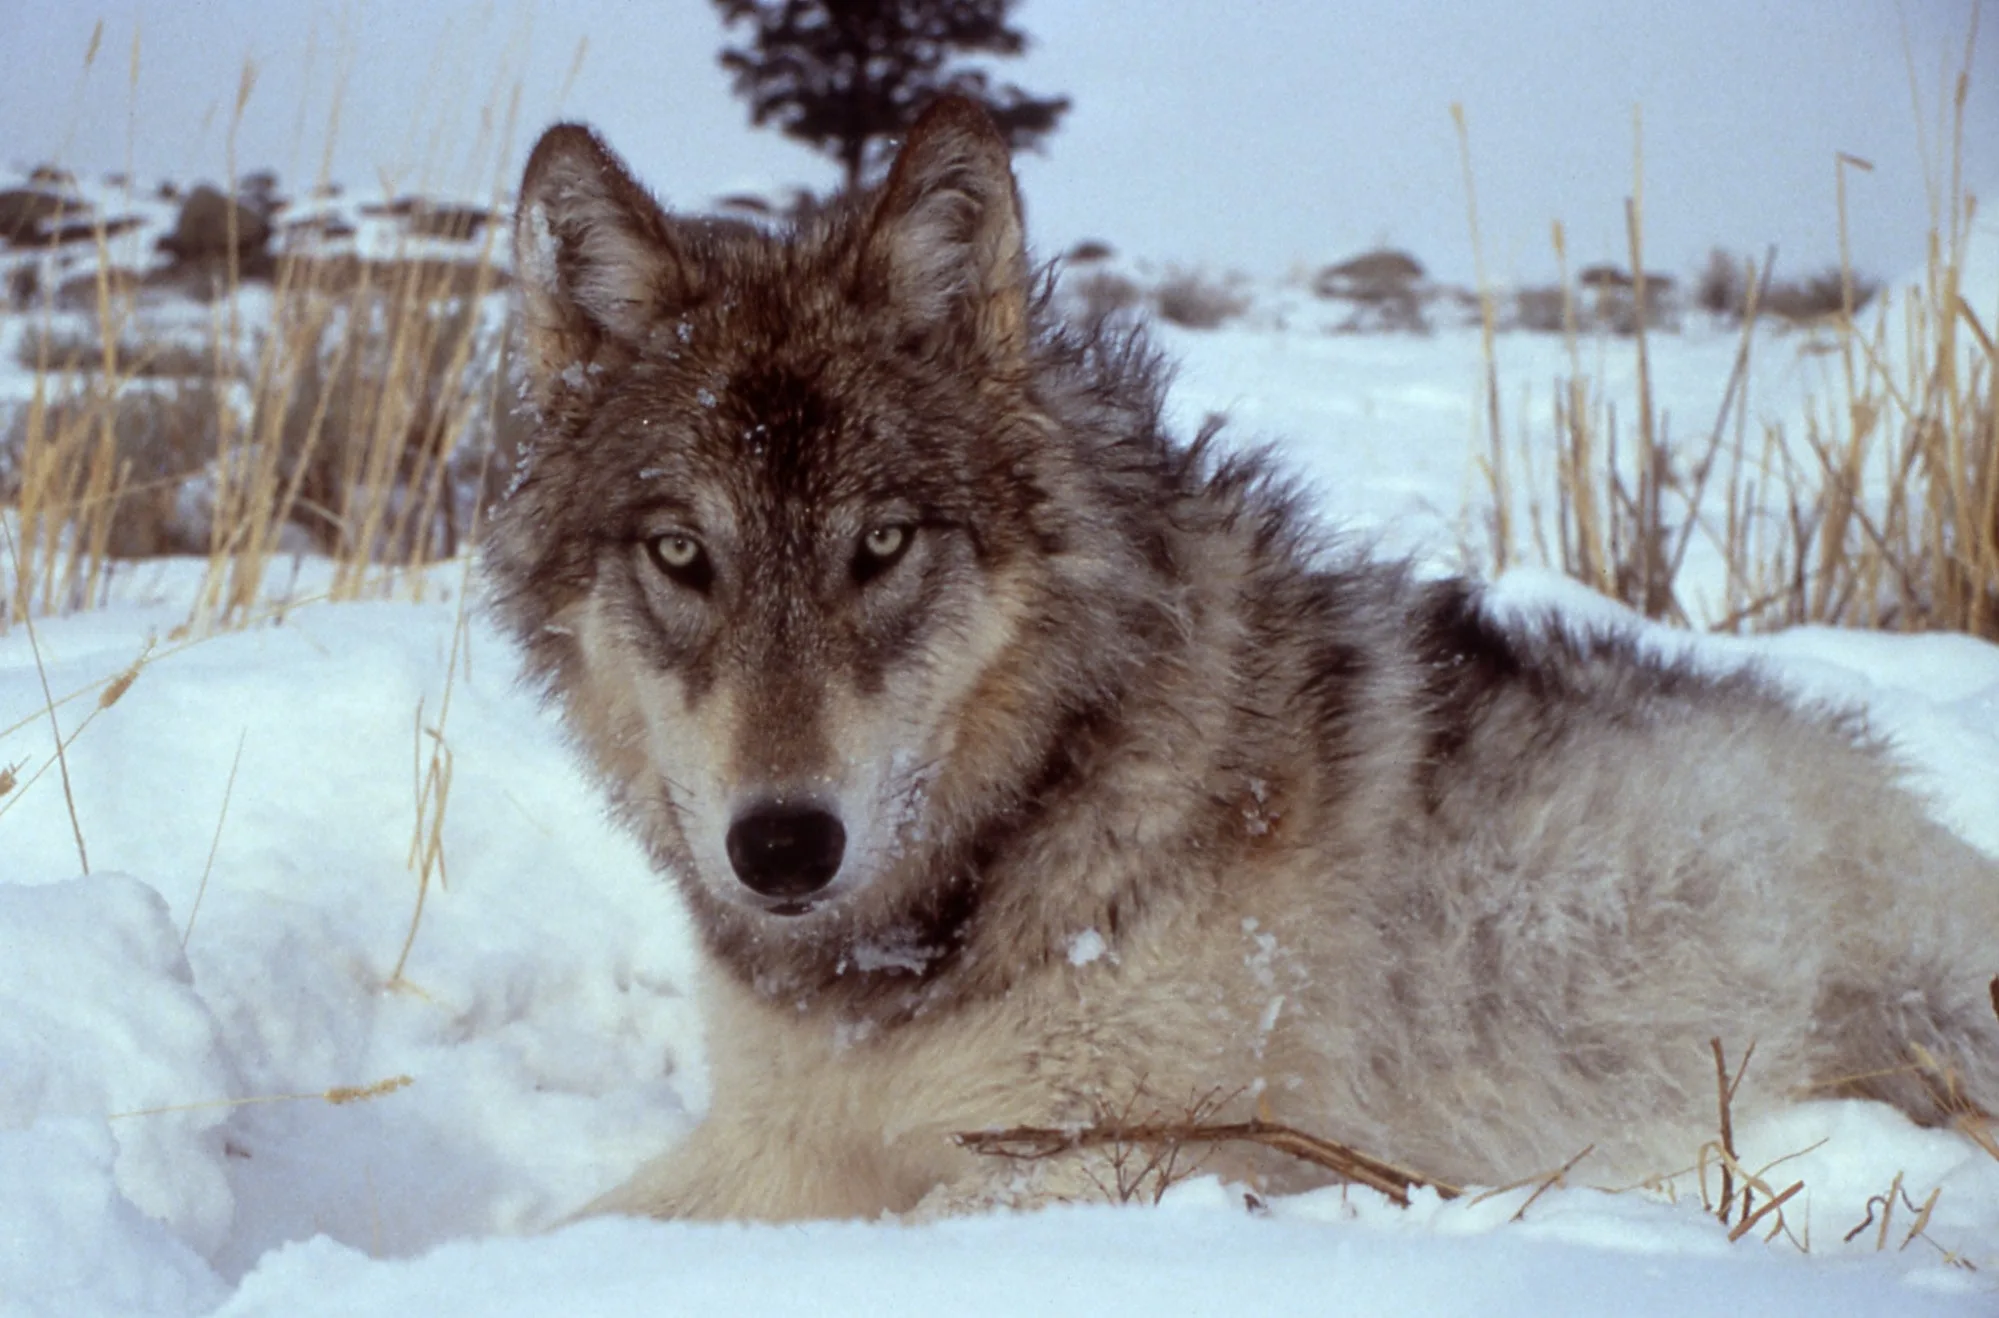 Reintroduction of gray wolves at Yellowstone National Park